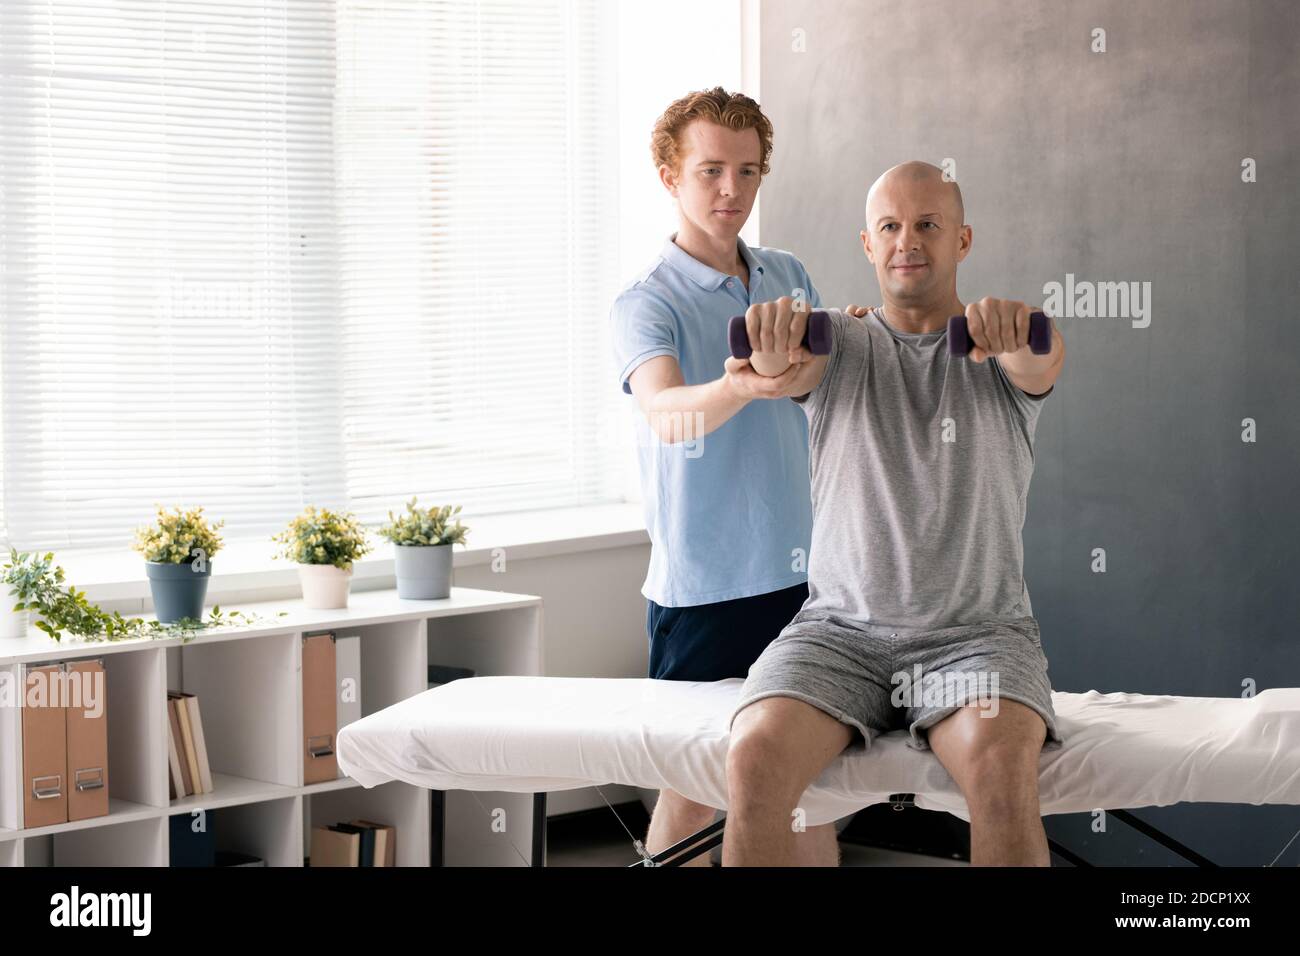 Professional male physiotherapist supporting arm of exercising patient Stock Photo